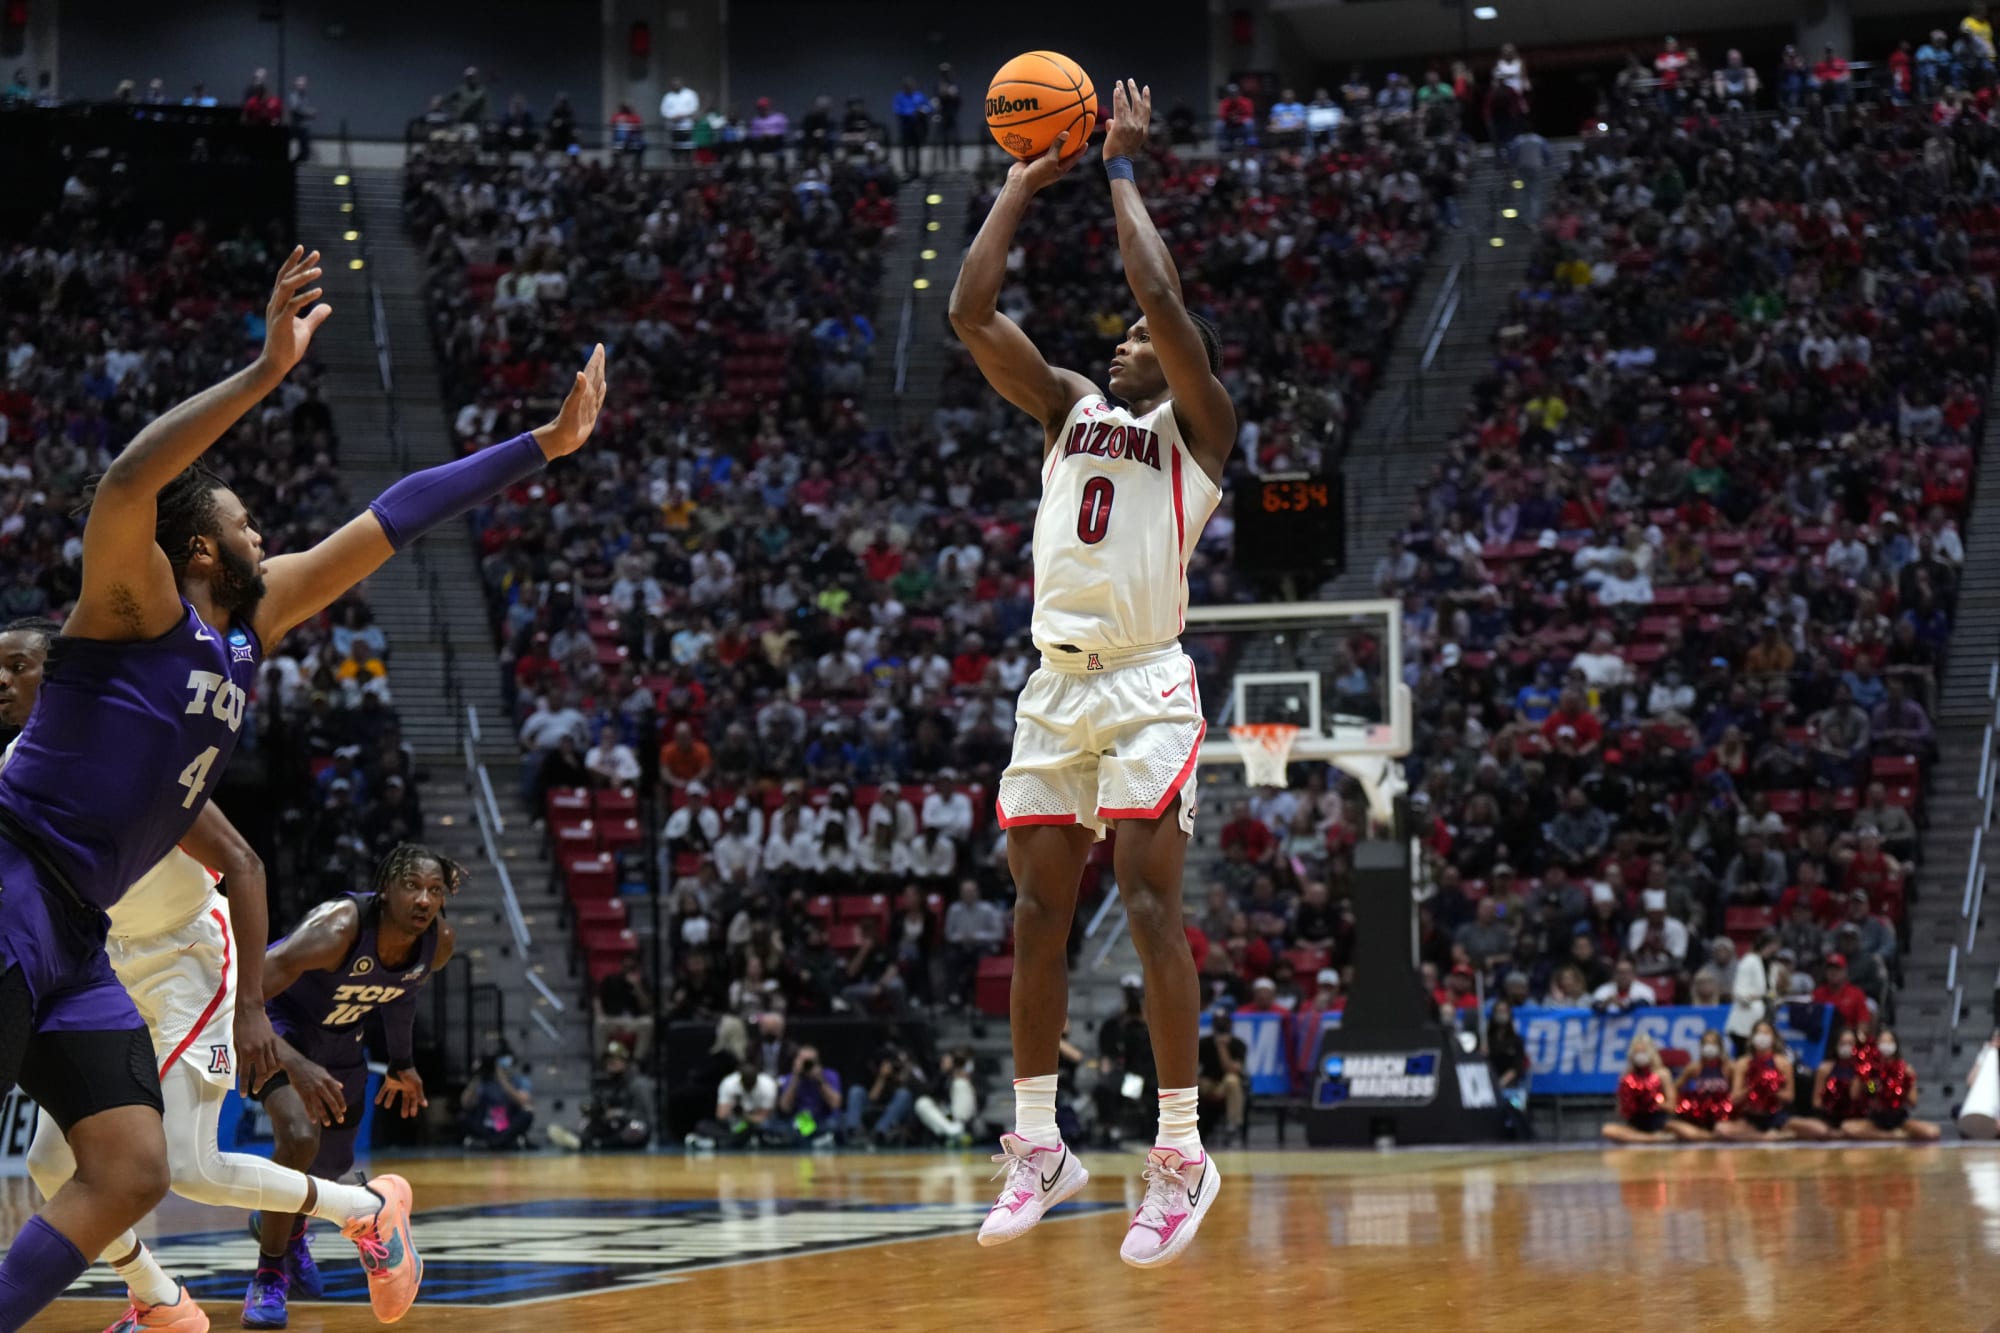 Photo of Arizona missed an all-time March Madness buzzer-beaters by less than a second [Video]